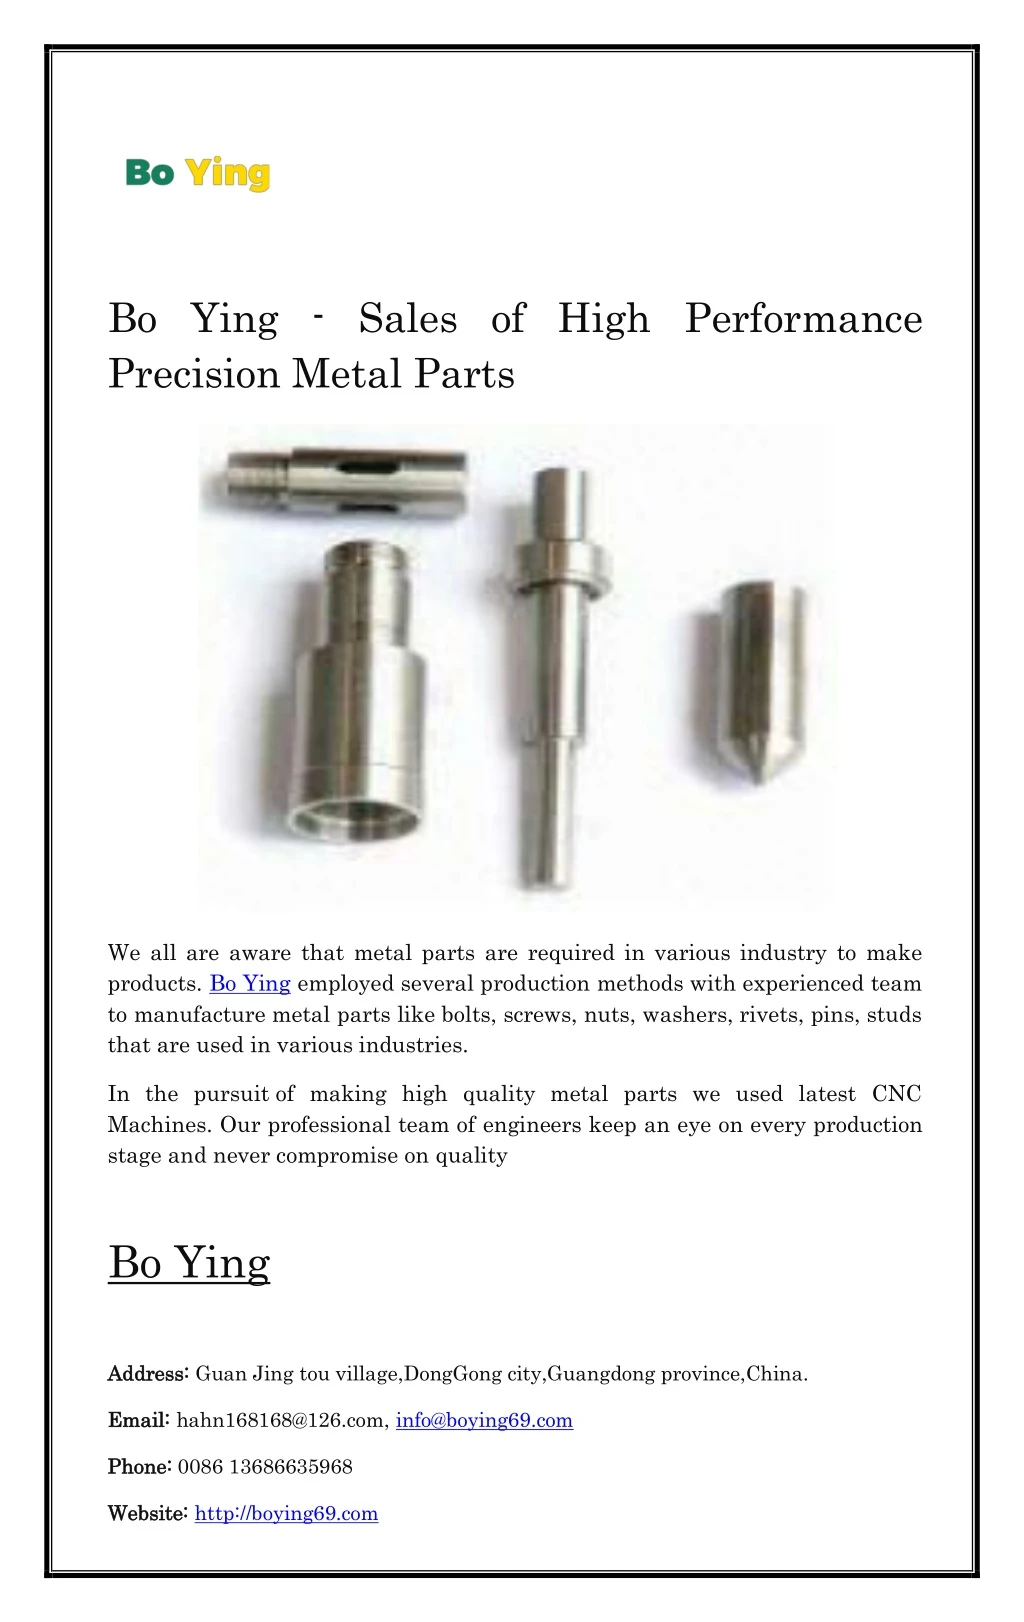 bo ying sales of high performance precision metal